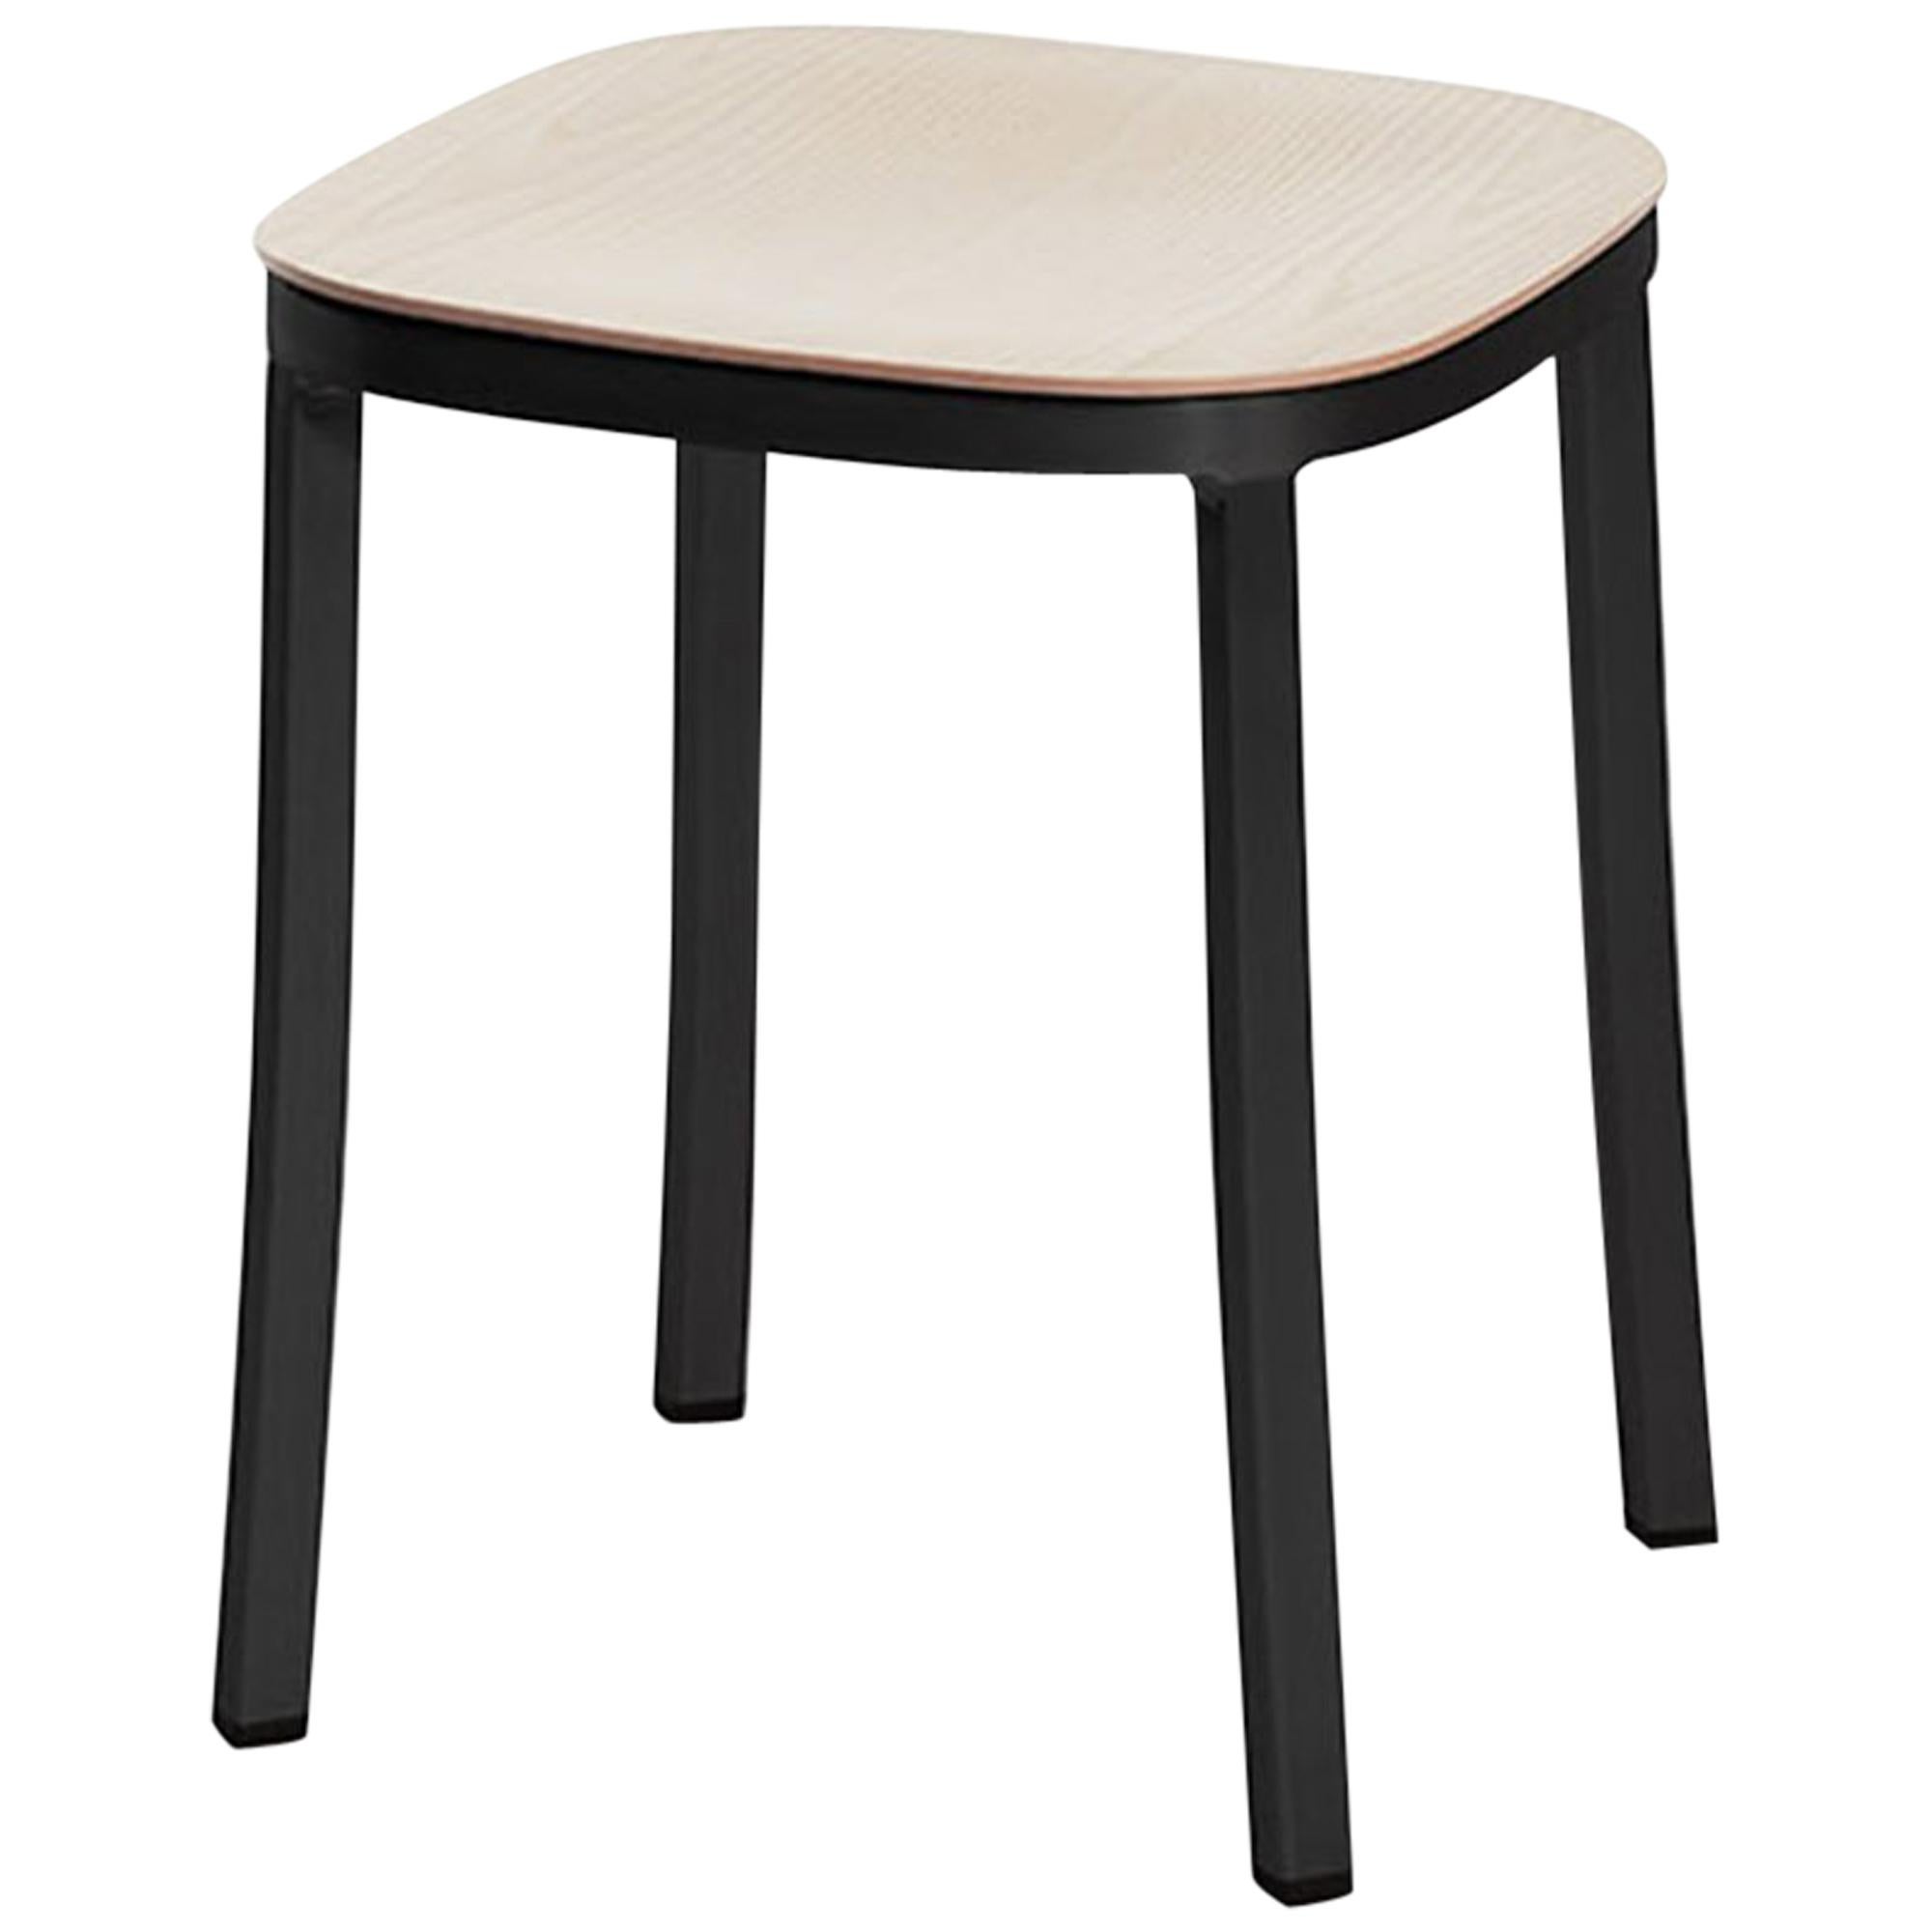 Emeco 1 Inch Small Stool in Dark Powder-Coated Aluminum & Ash by Jasper Morrison For Sale